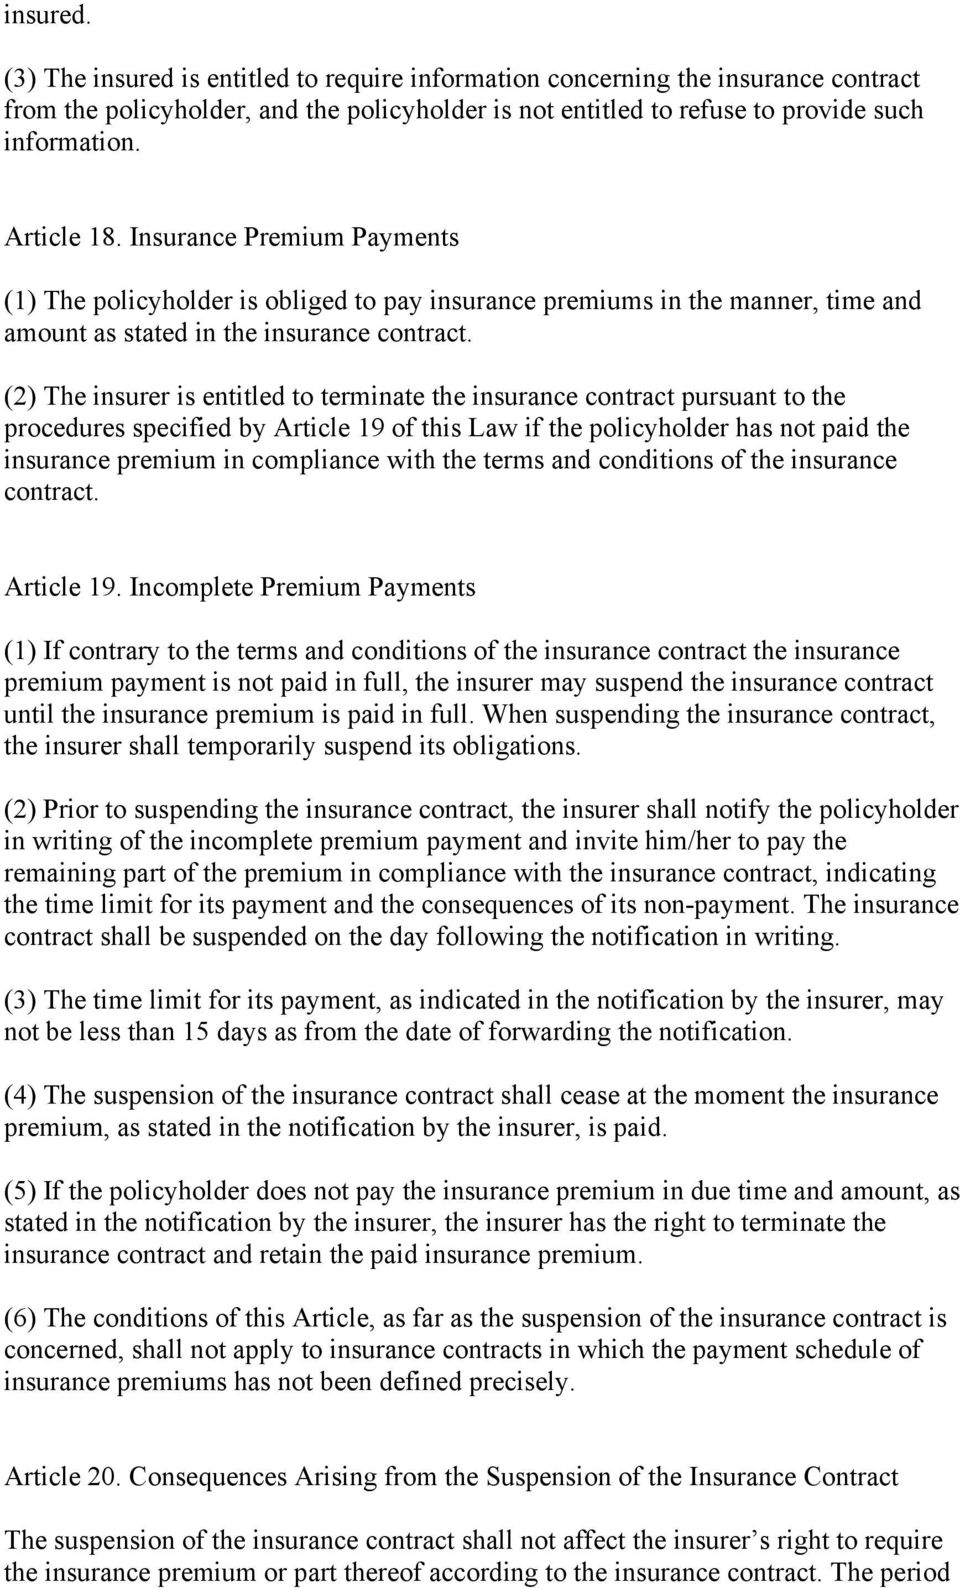 (2) The insurer is entitled to terminate the insurance contract pursuant to the procedures specified by Article 19 of this Law if the policyholder has not paid the insurance premium in compliance